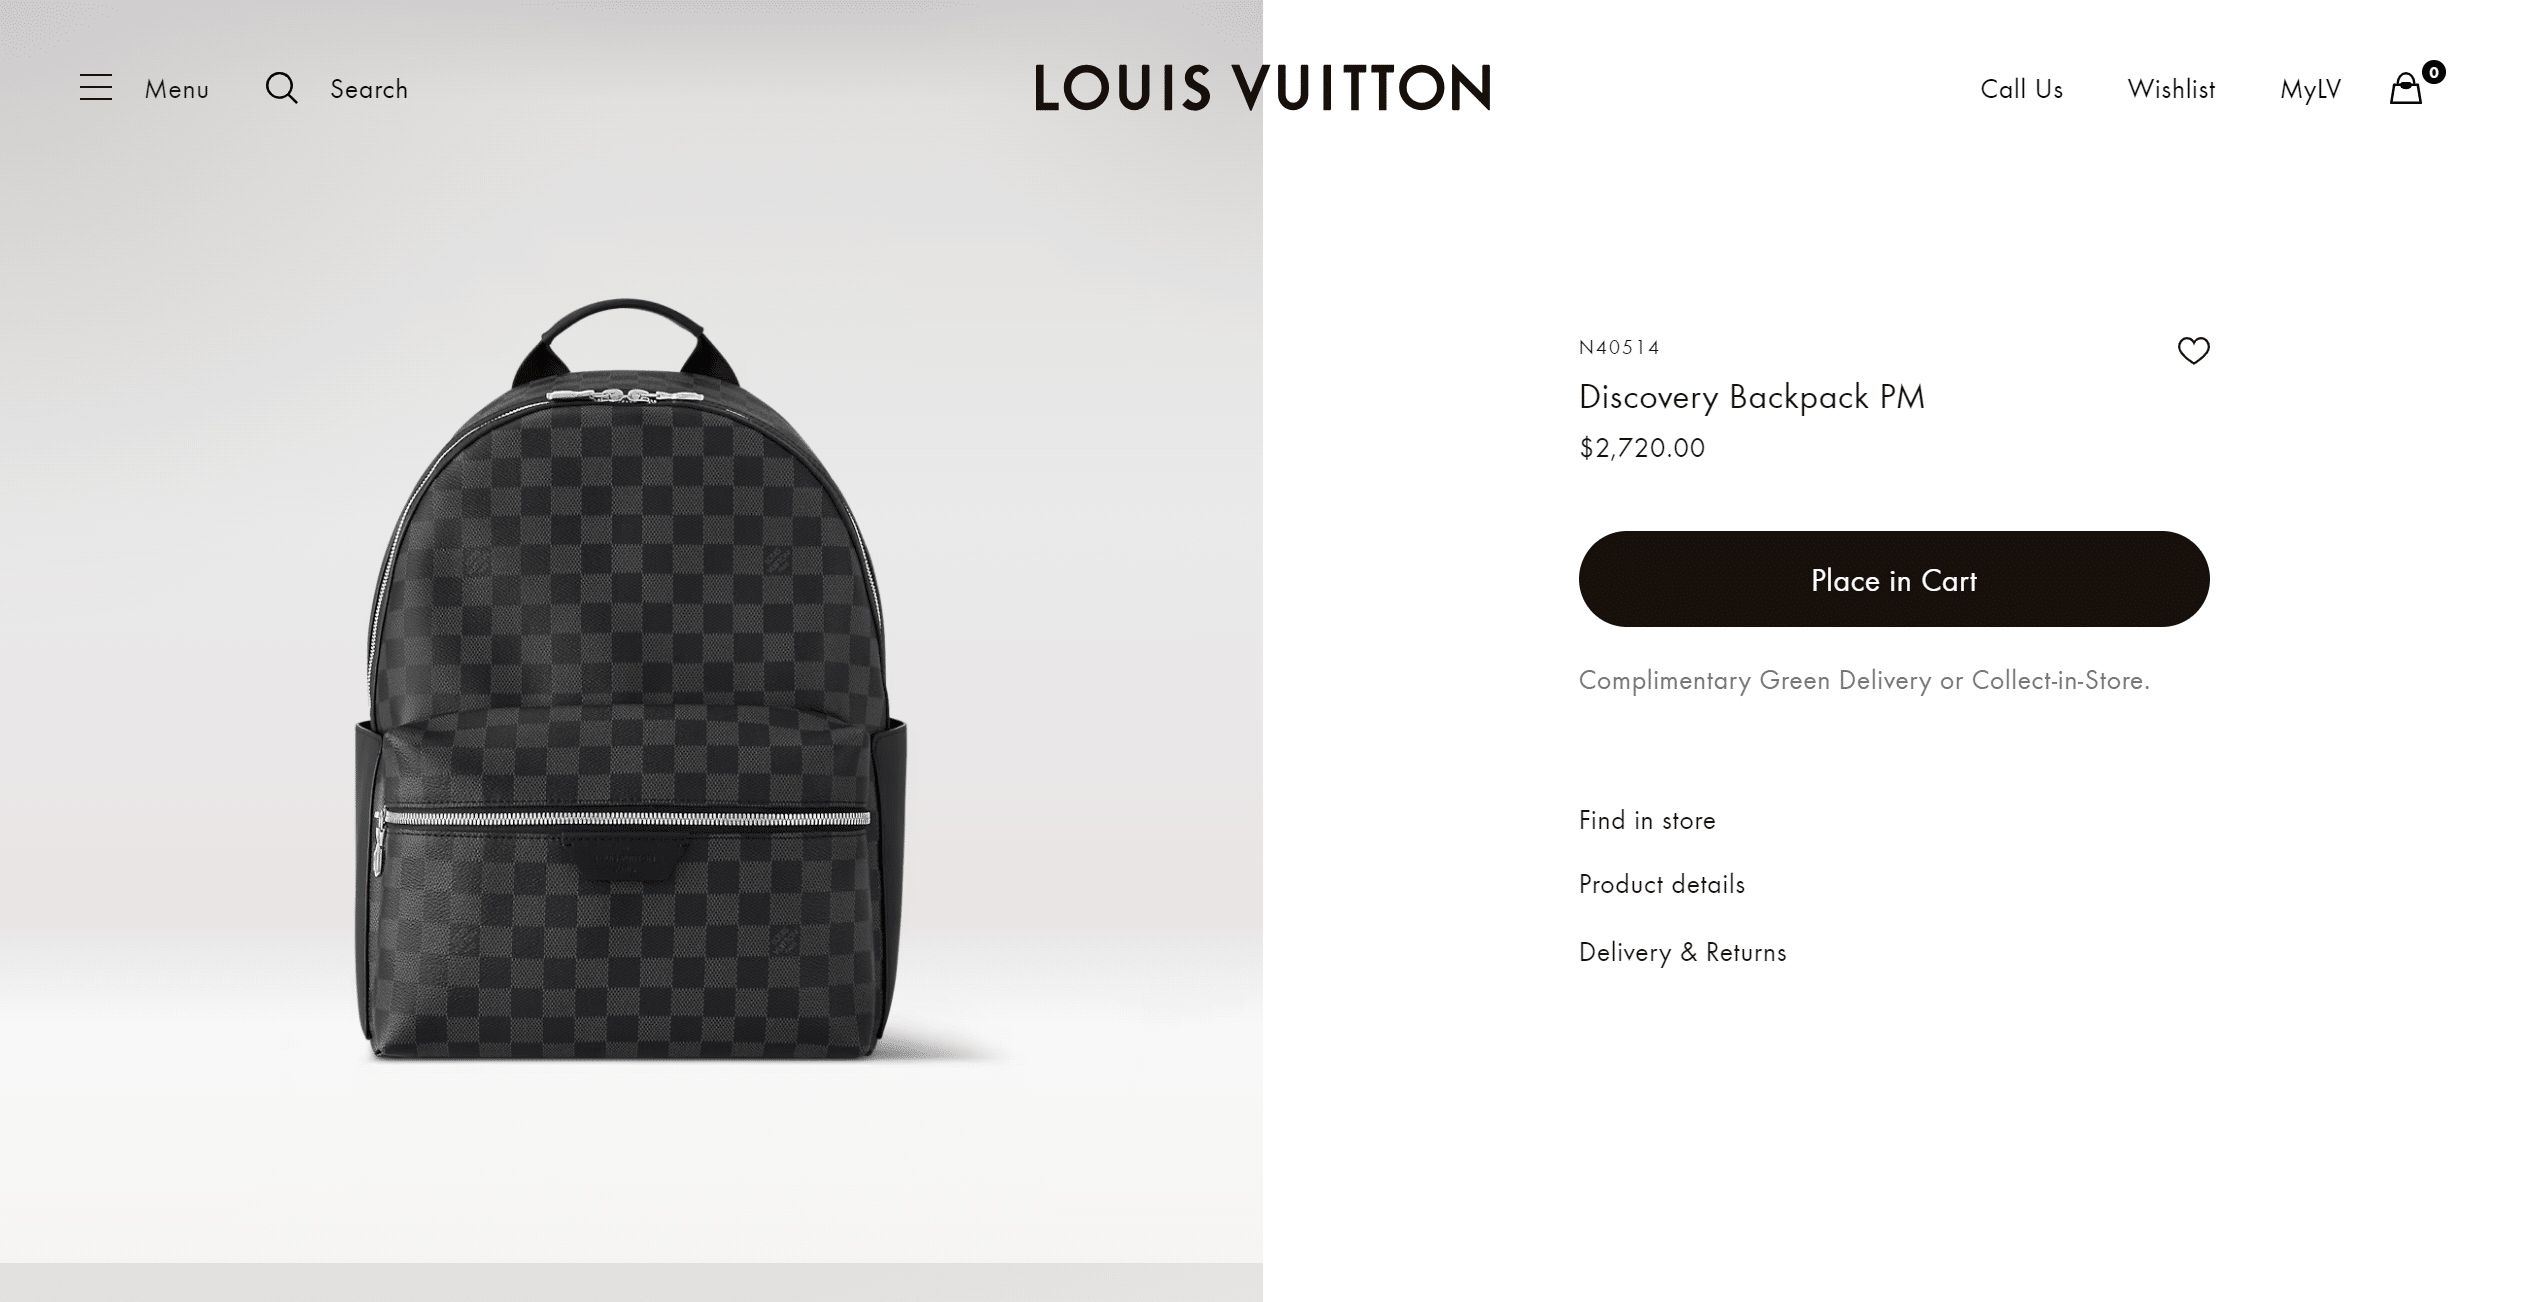 Discovery-Backpack-PM-Damier-Graphite-Canvas-Men-Bags-LOUIS-VUITTON-.png